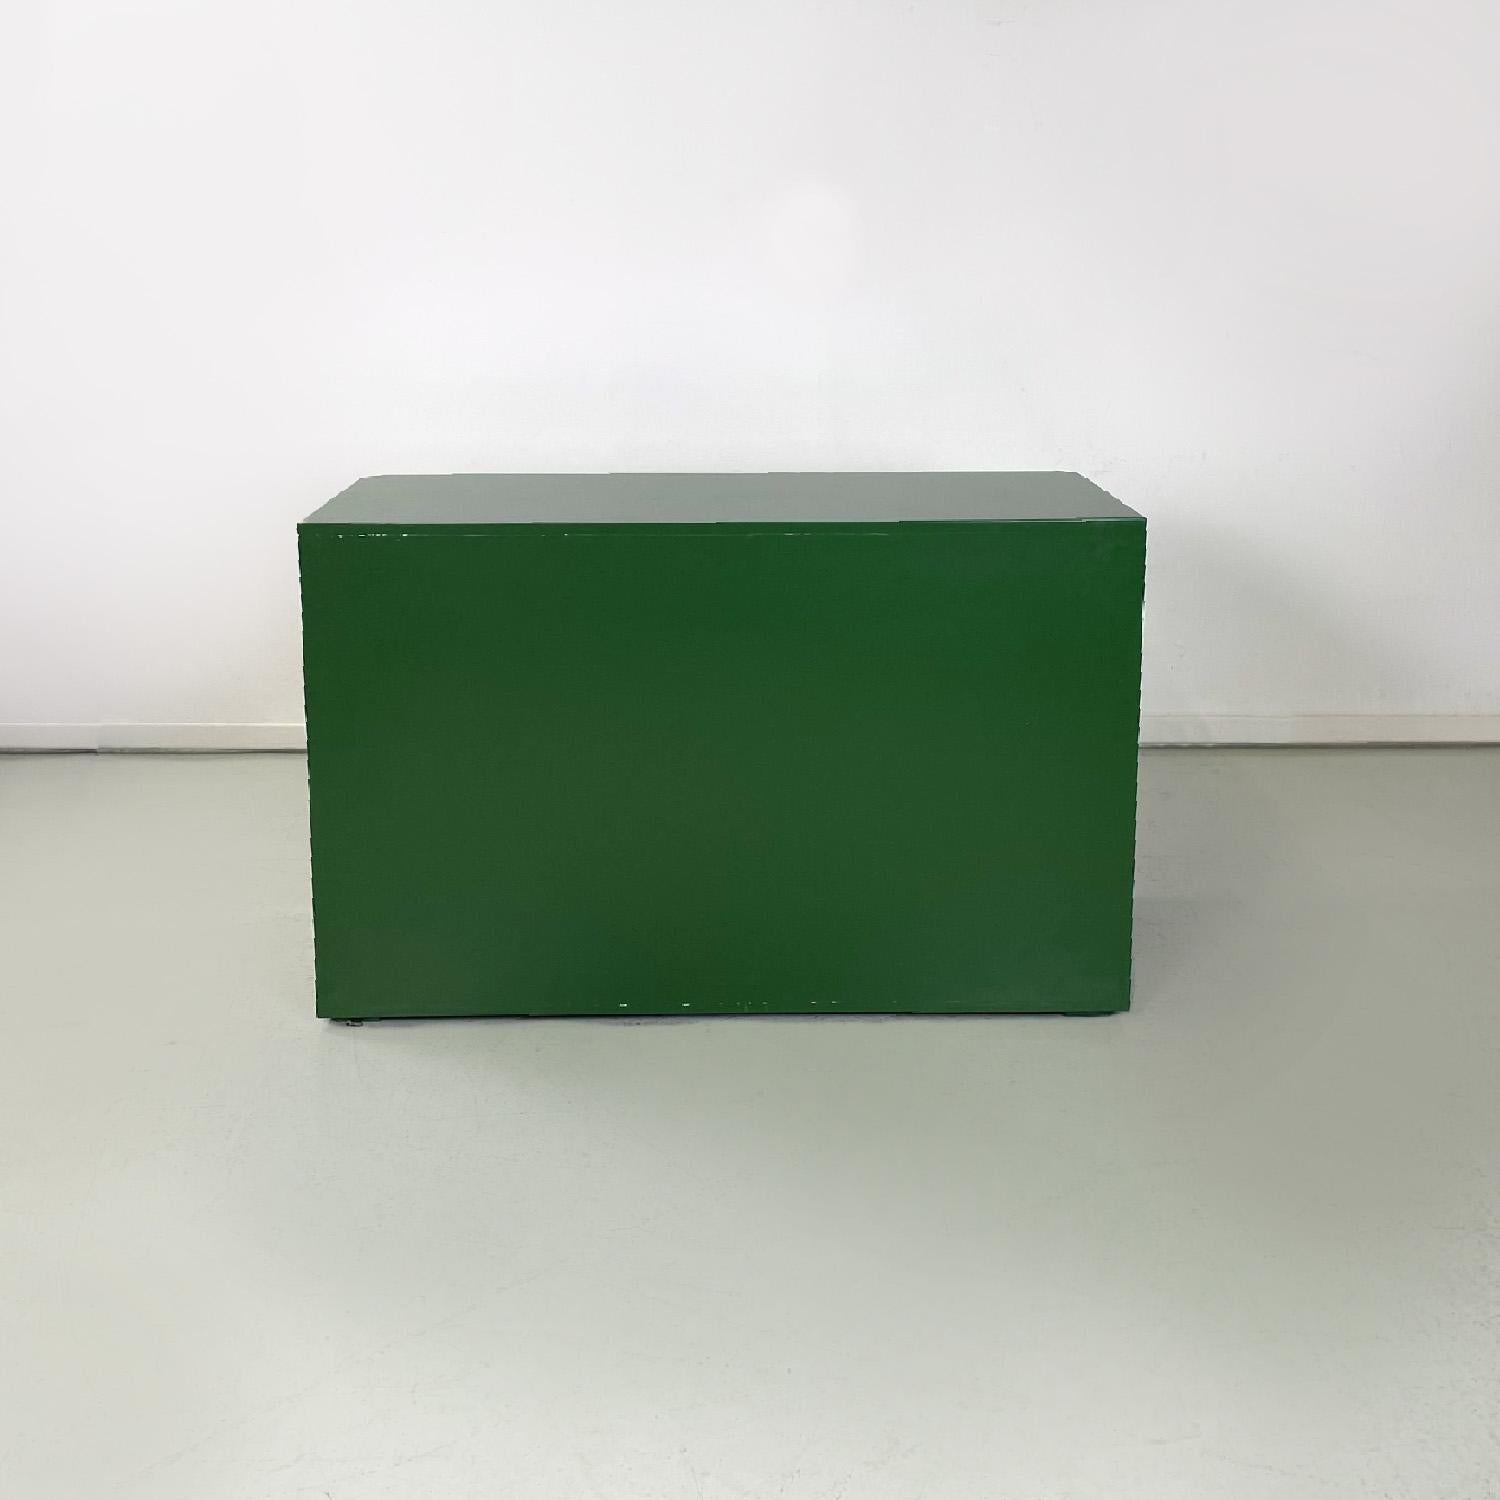 Modern Italian modern MB3 chest of drawers by Luigi Caccia Dominioni for Azucena, 1970s For Sale